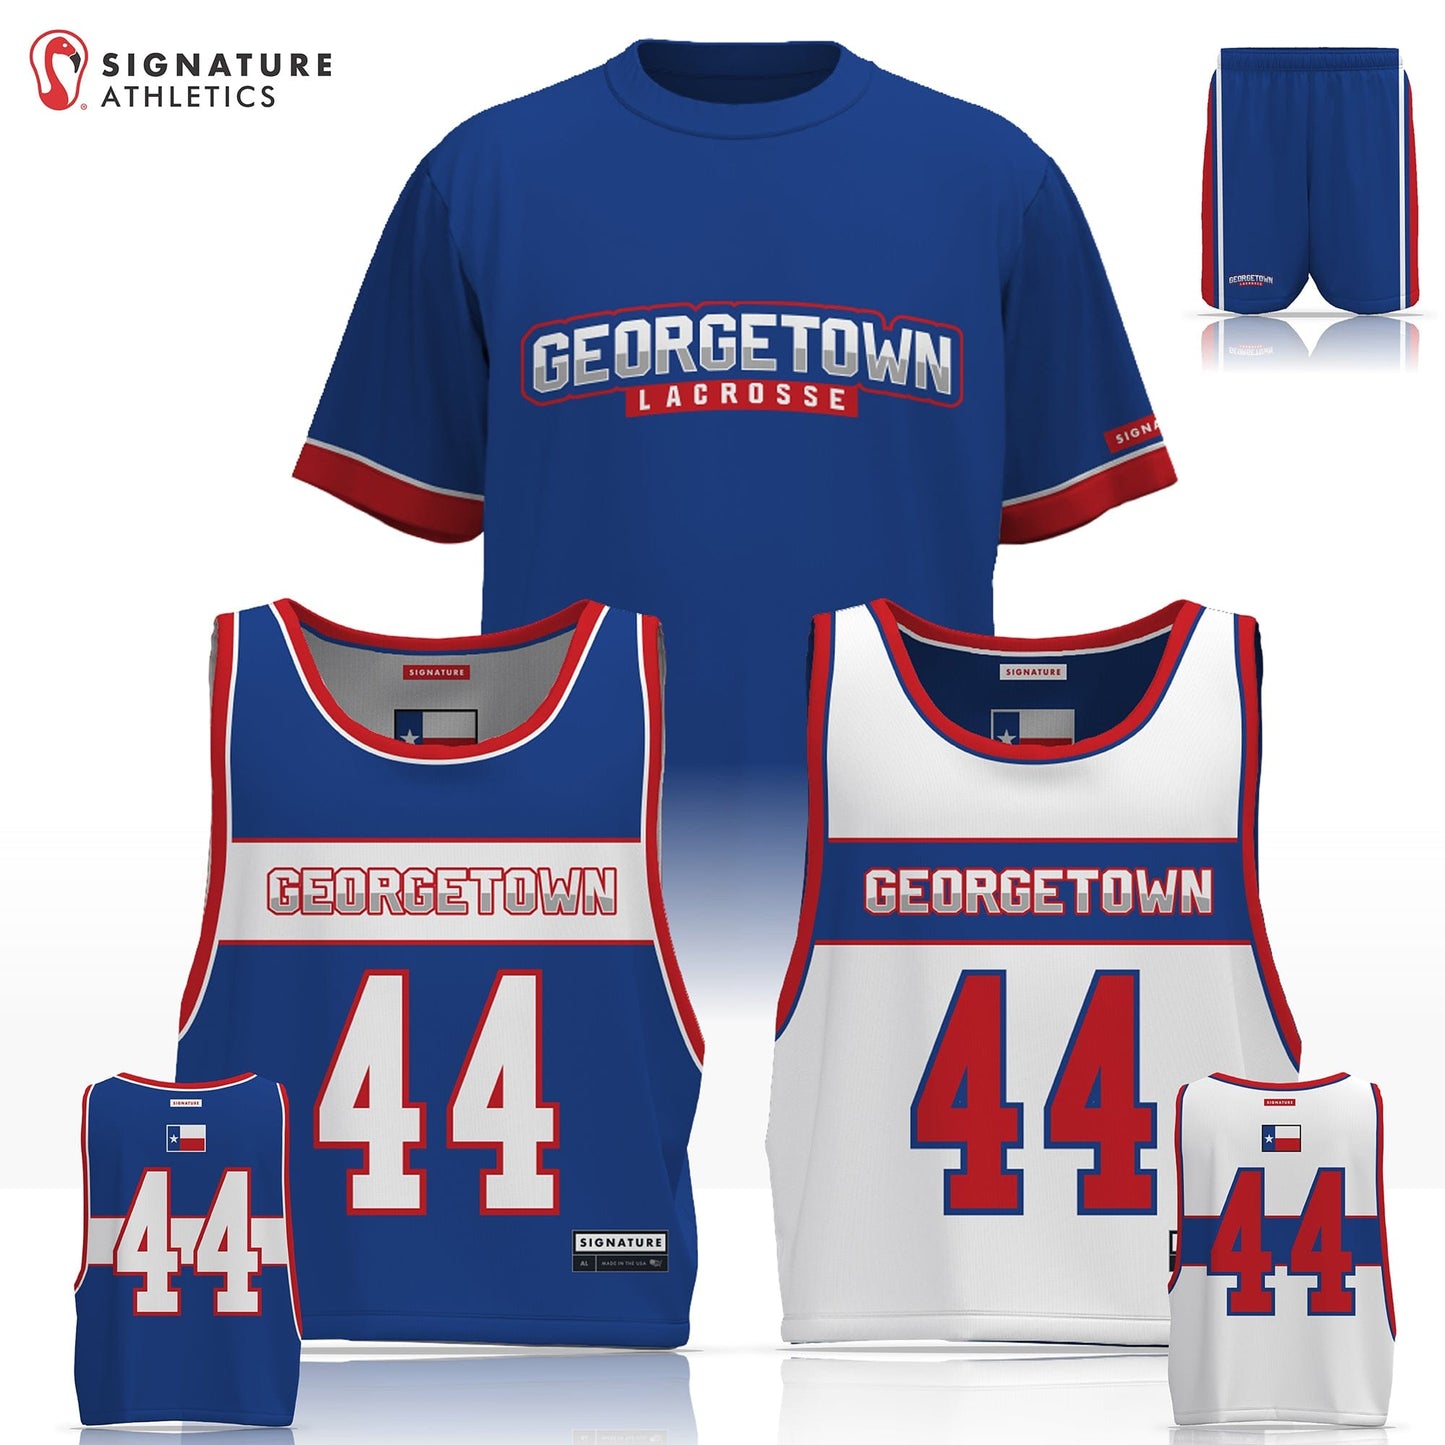 Georgetown Youth Lacrosse Men's 3 Piece Player Game Package: 5th/6th (Juniors) Signature Lacrosse